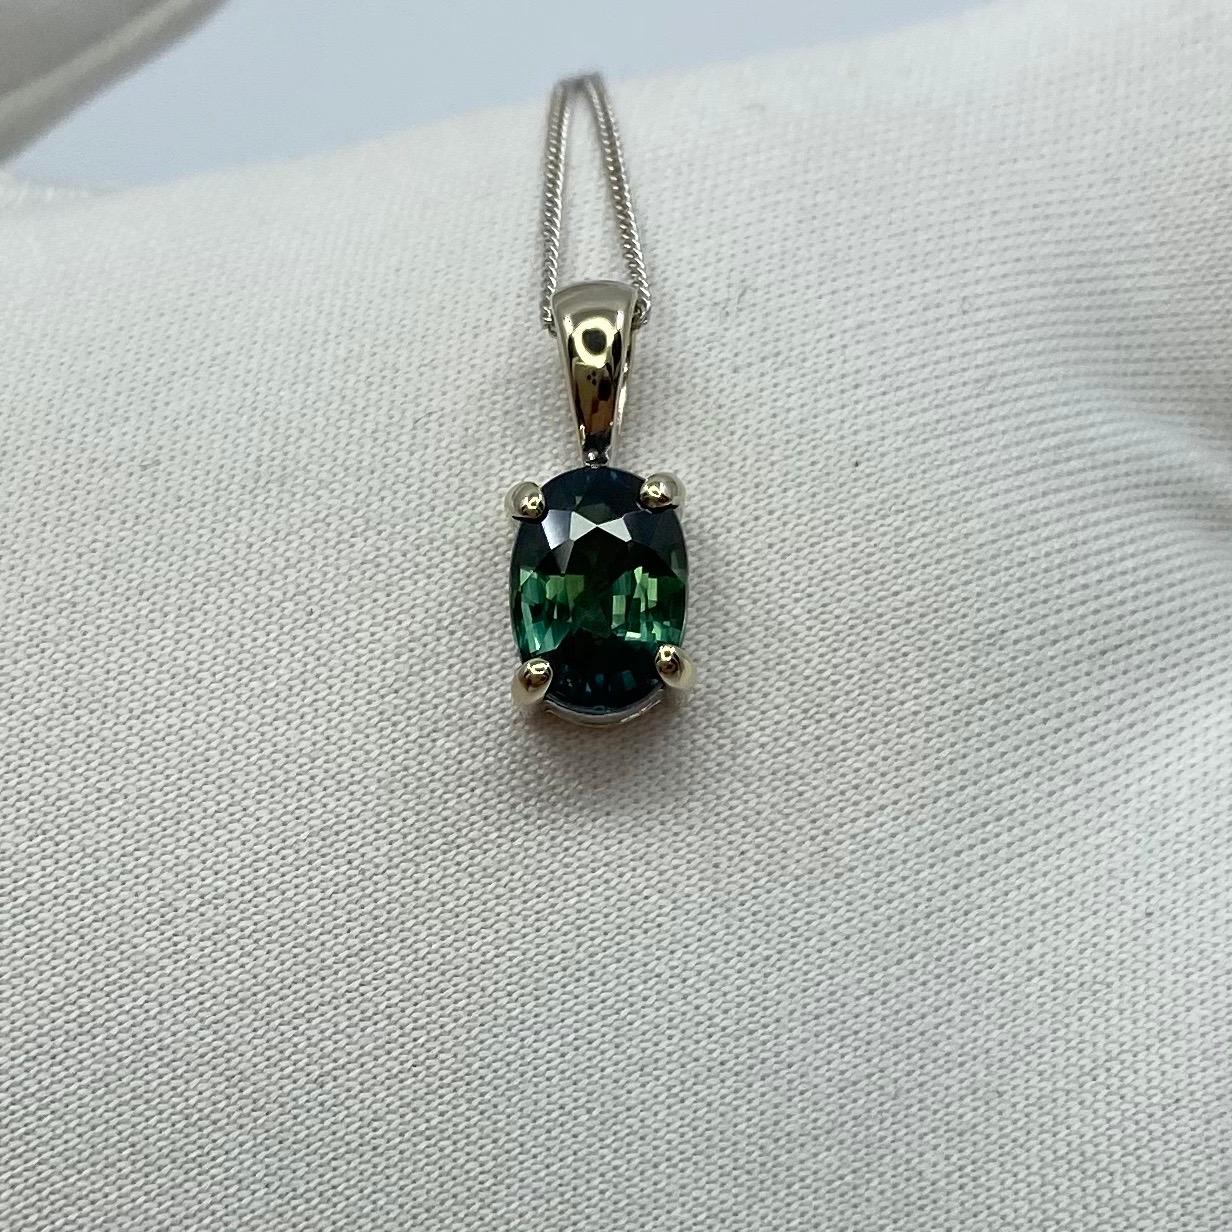 IGI Certified Untreated Bi-Colour Sapphire Pendant Necklace

1.18 Carat sapphire with rare bi-colour effect. Showing hues of green and blue, very rare and stunning to see. Also has excellent clarity, very clean stone with an an excellent oval